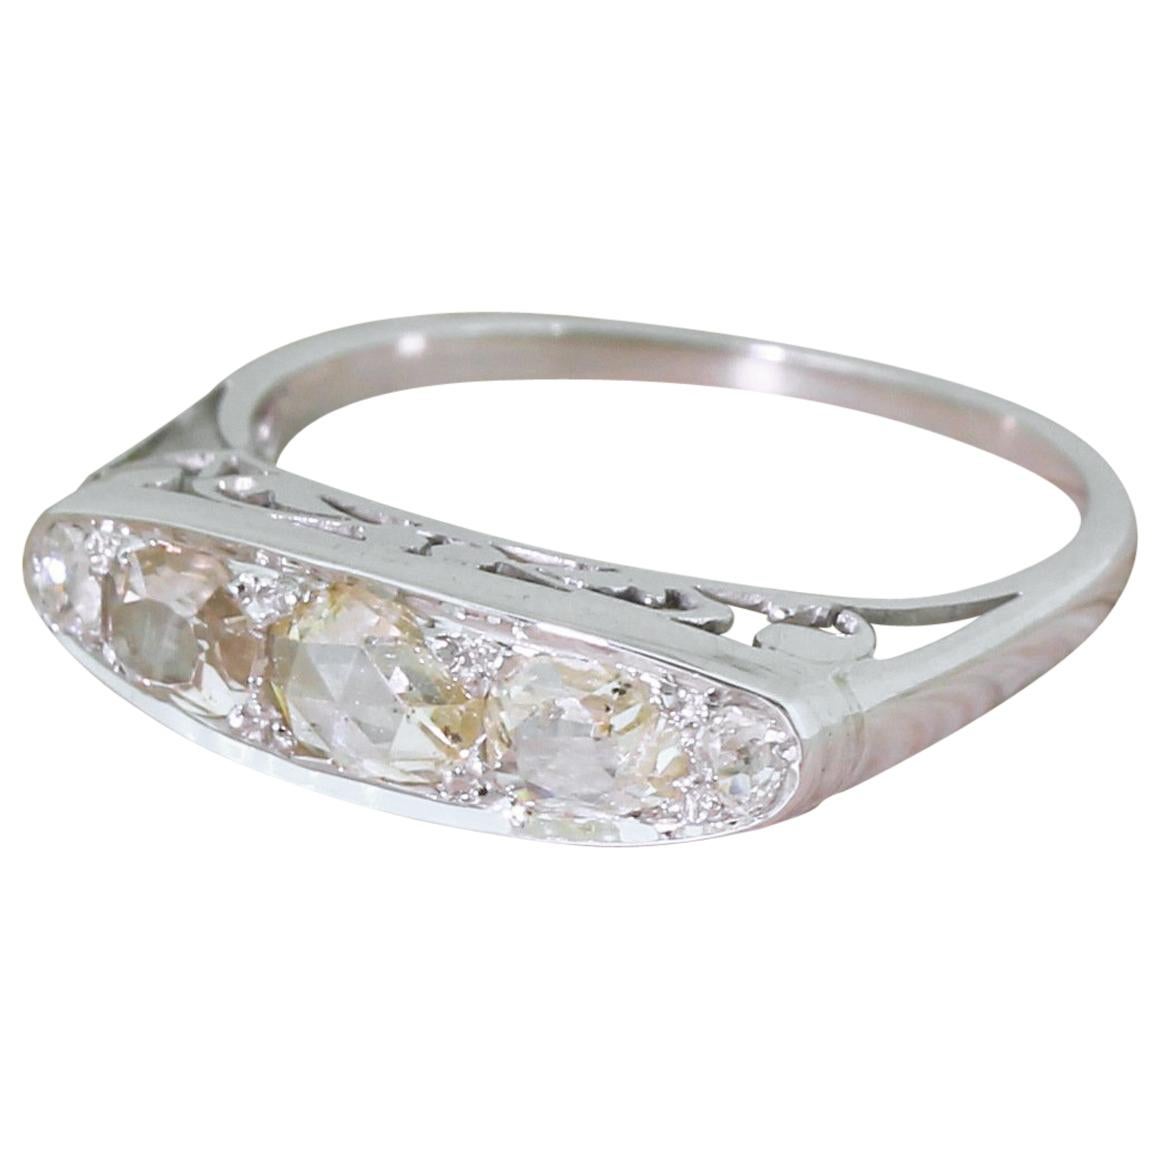 Midcentury Rose Cut and Old Cut Diamond Five-Stone Ring